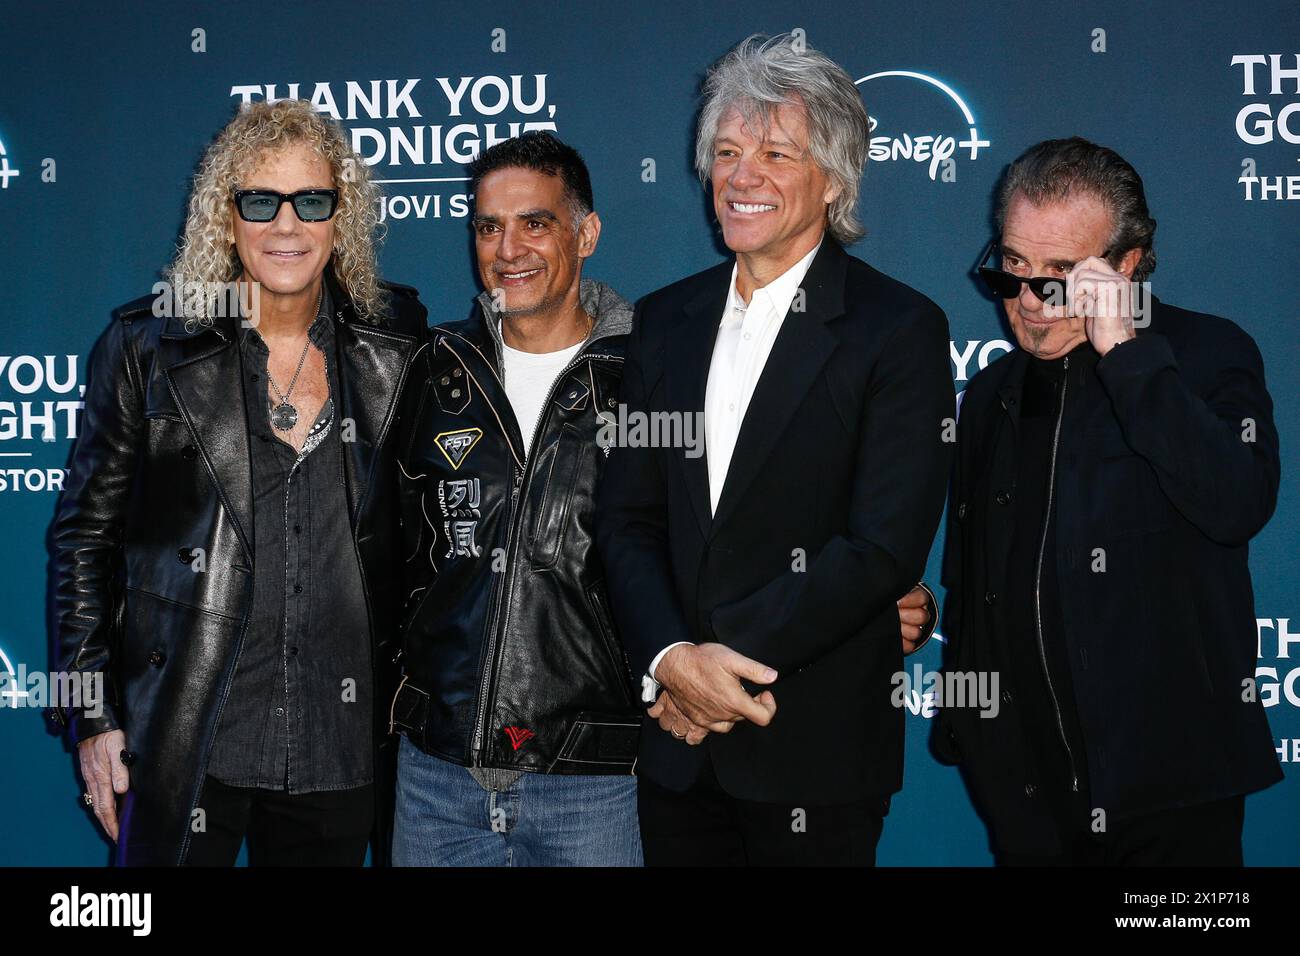 London, UK. 17th Apr, 2024. Tico Torres, Jon Bon Jovi, David Bryan, and Gotham Chopra attend the UK Premiere of 'Thank You, Goodnight: The Bon Jovi Story' held at the Odeon Luxe, Leicester Square, London. Credit: SOPA Images Limited/Alamy Live News Stock Photo